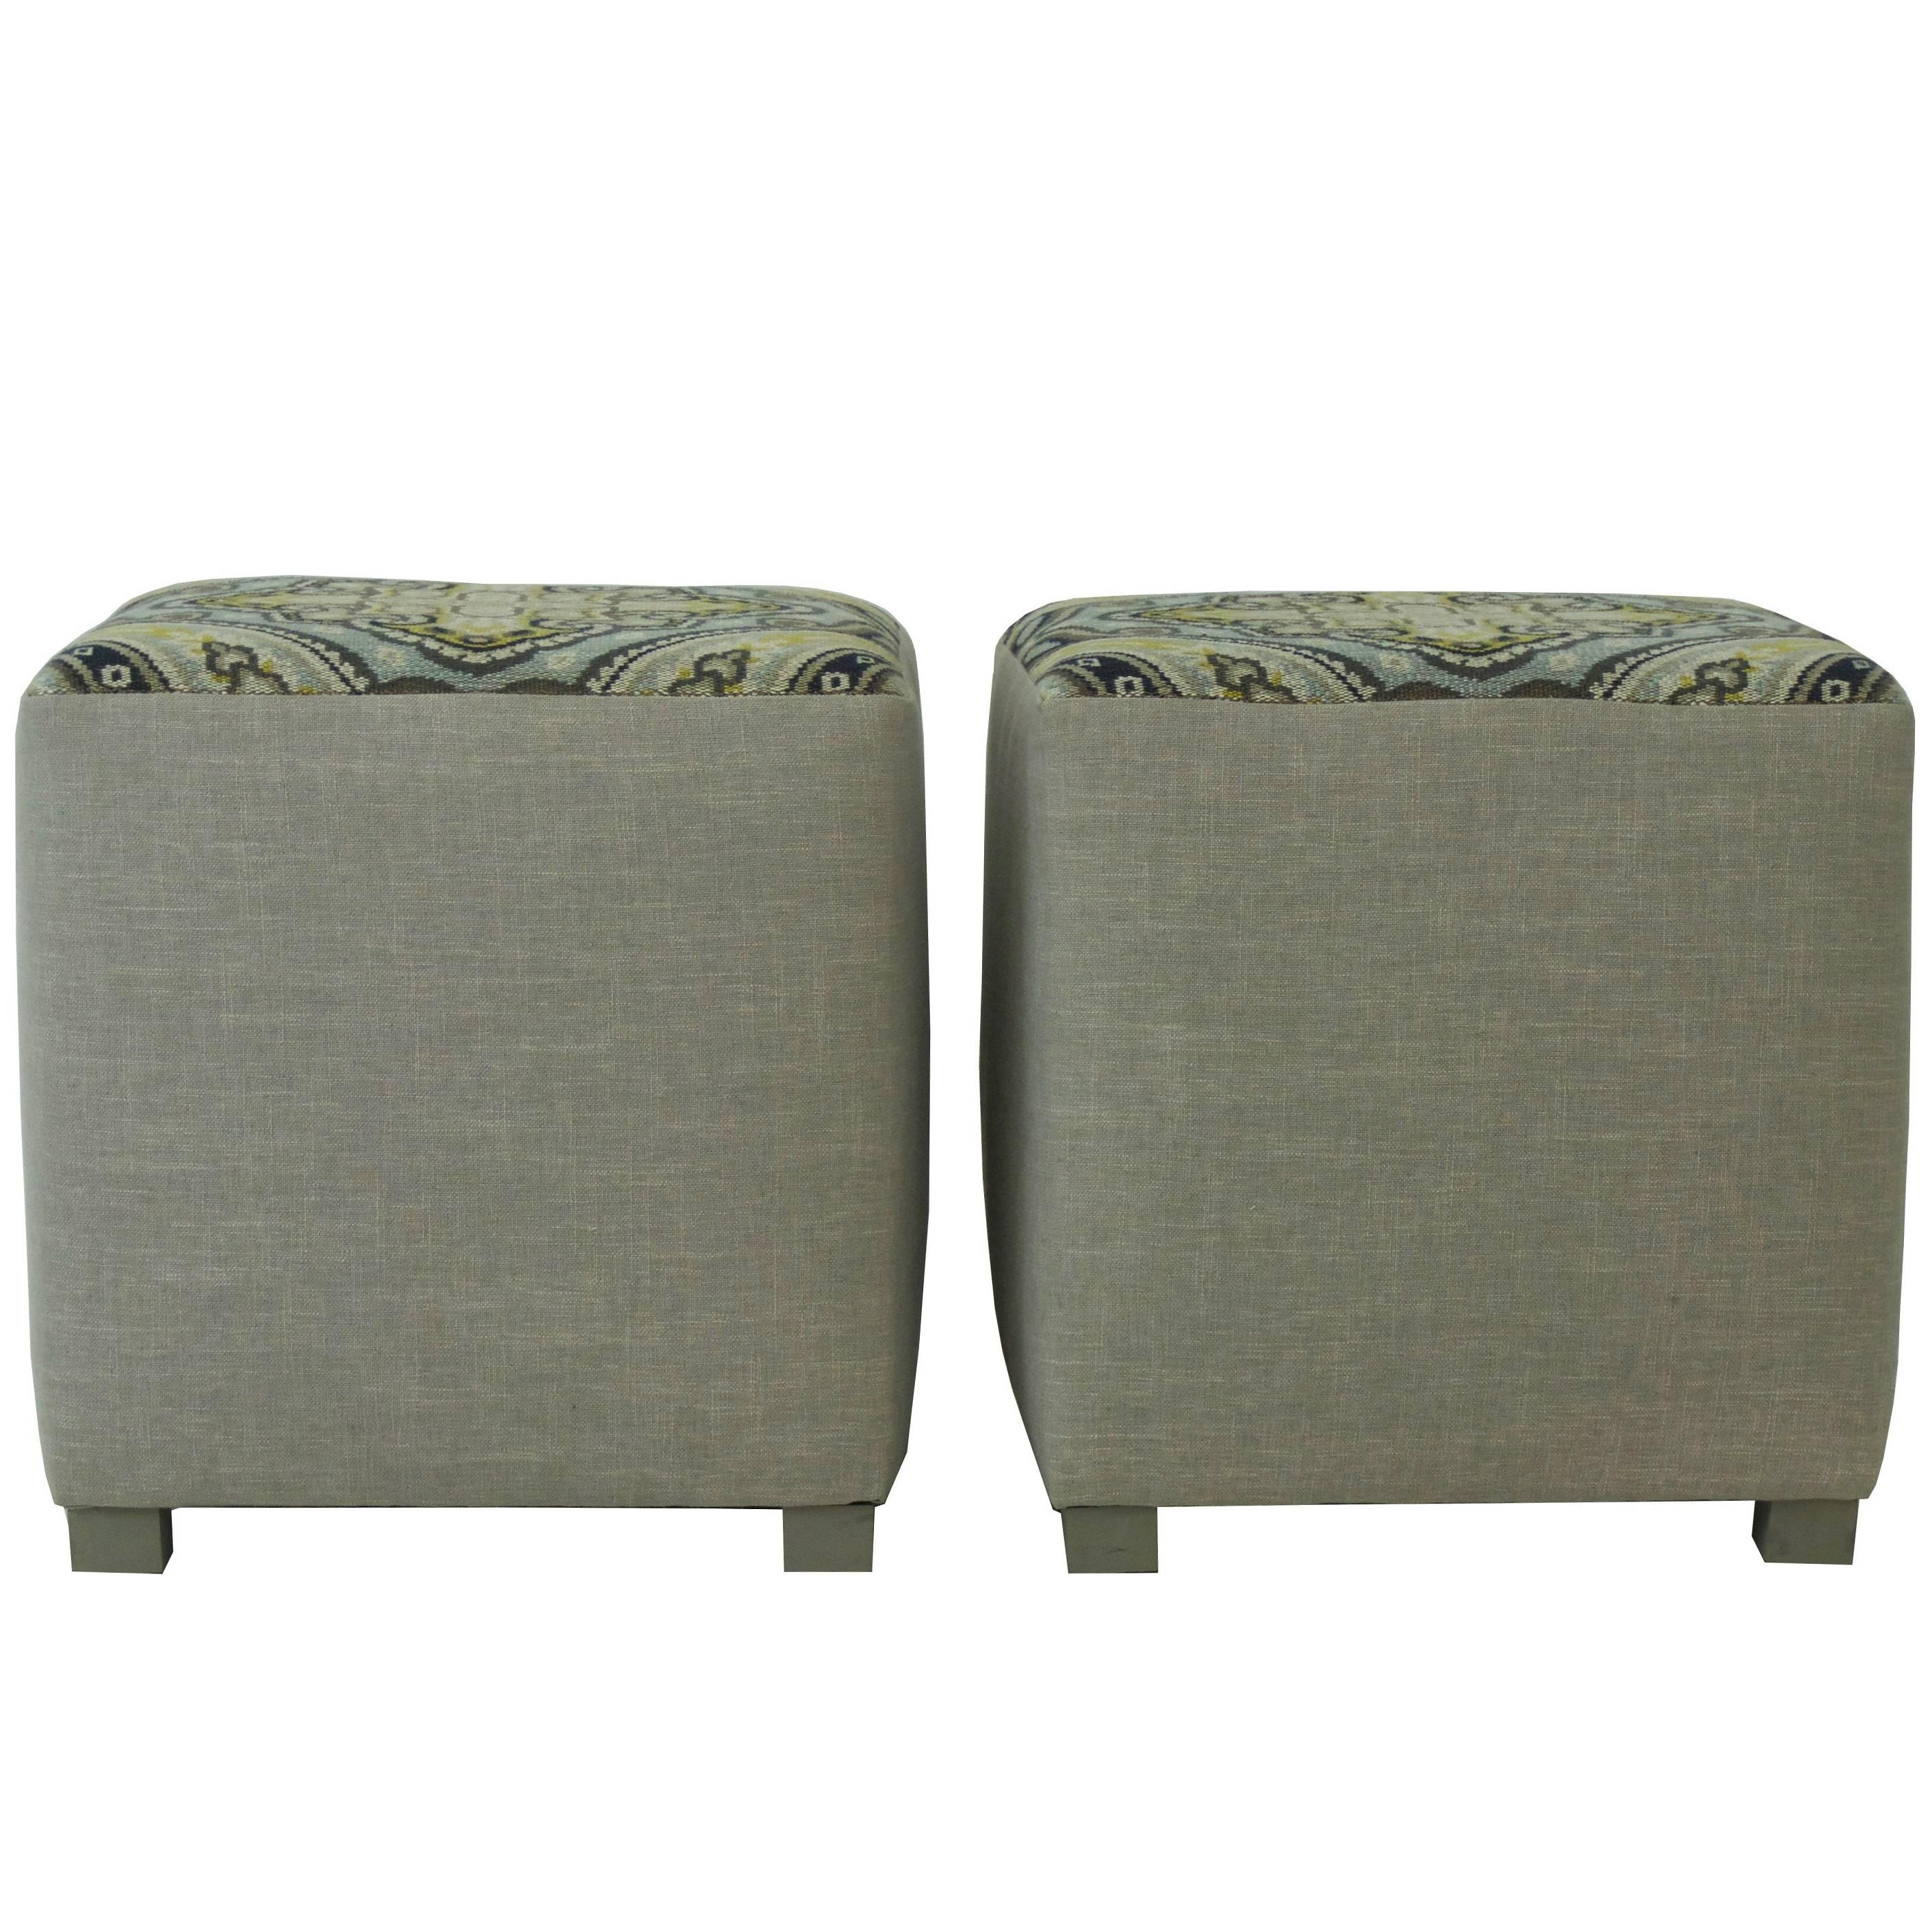 Upholstered Cube Ottoman